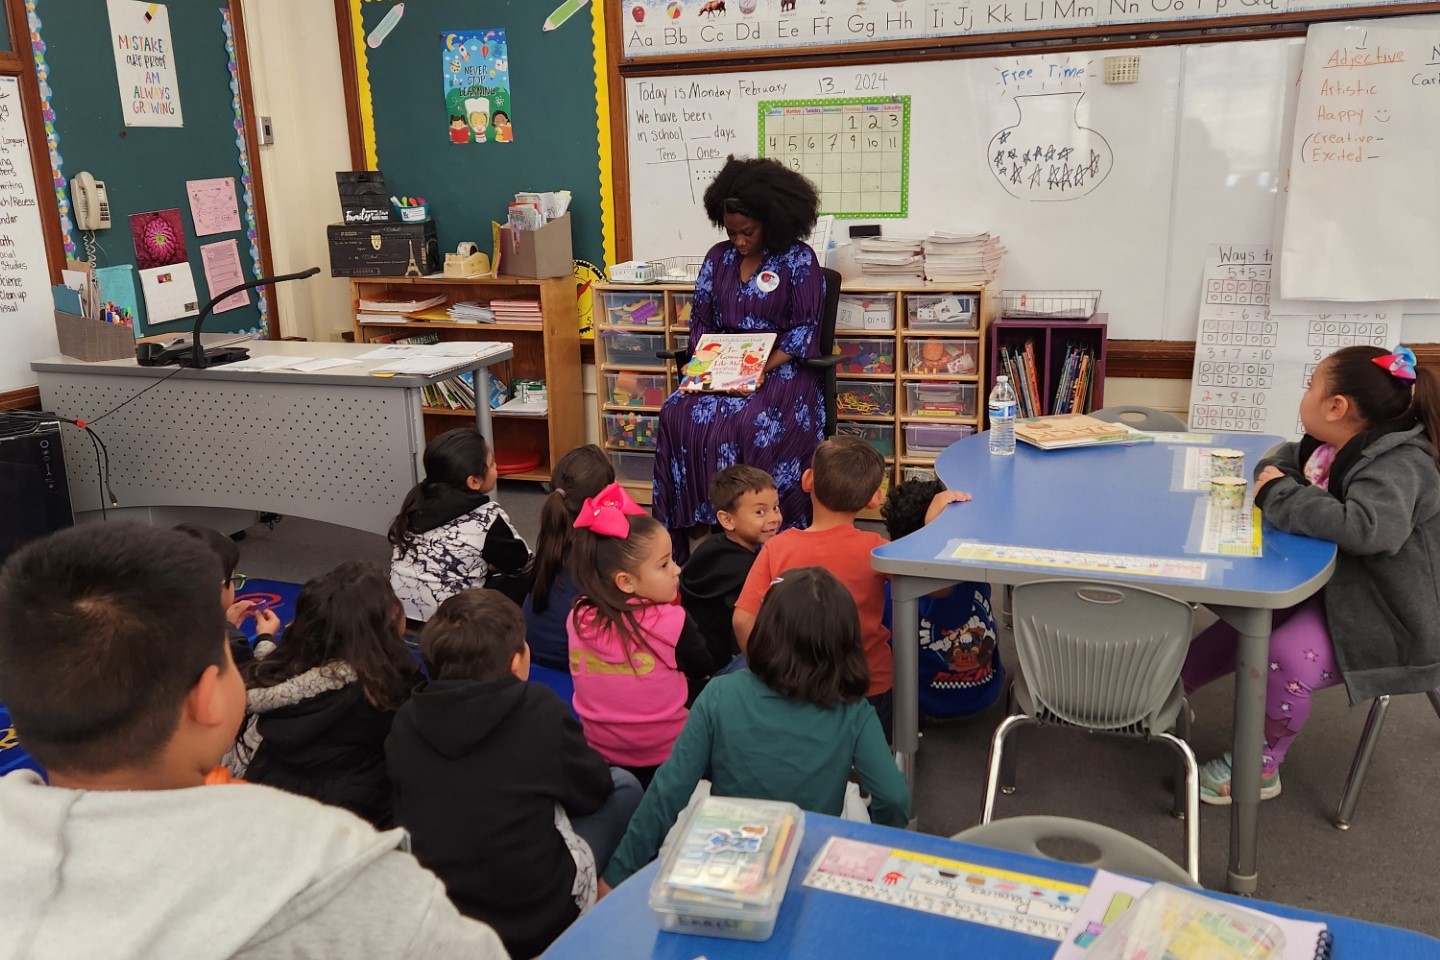 A guest reader holds up a book as she reads to students sitting in front of her